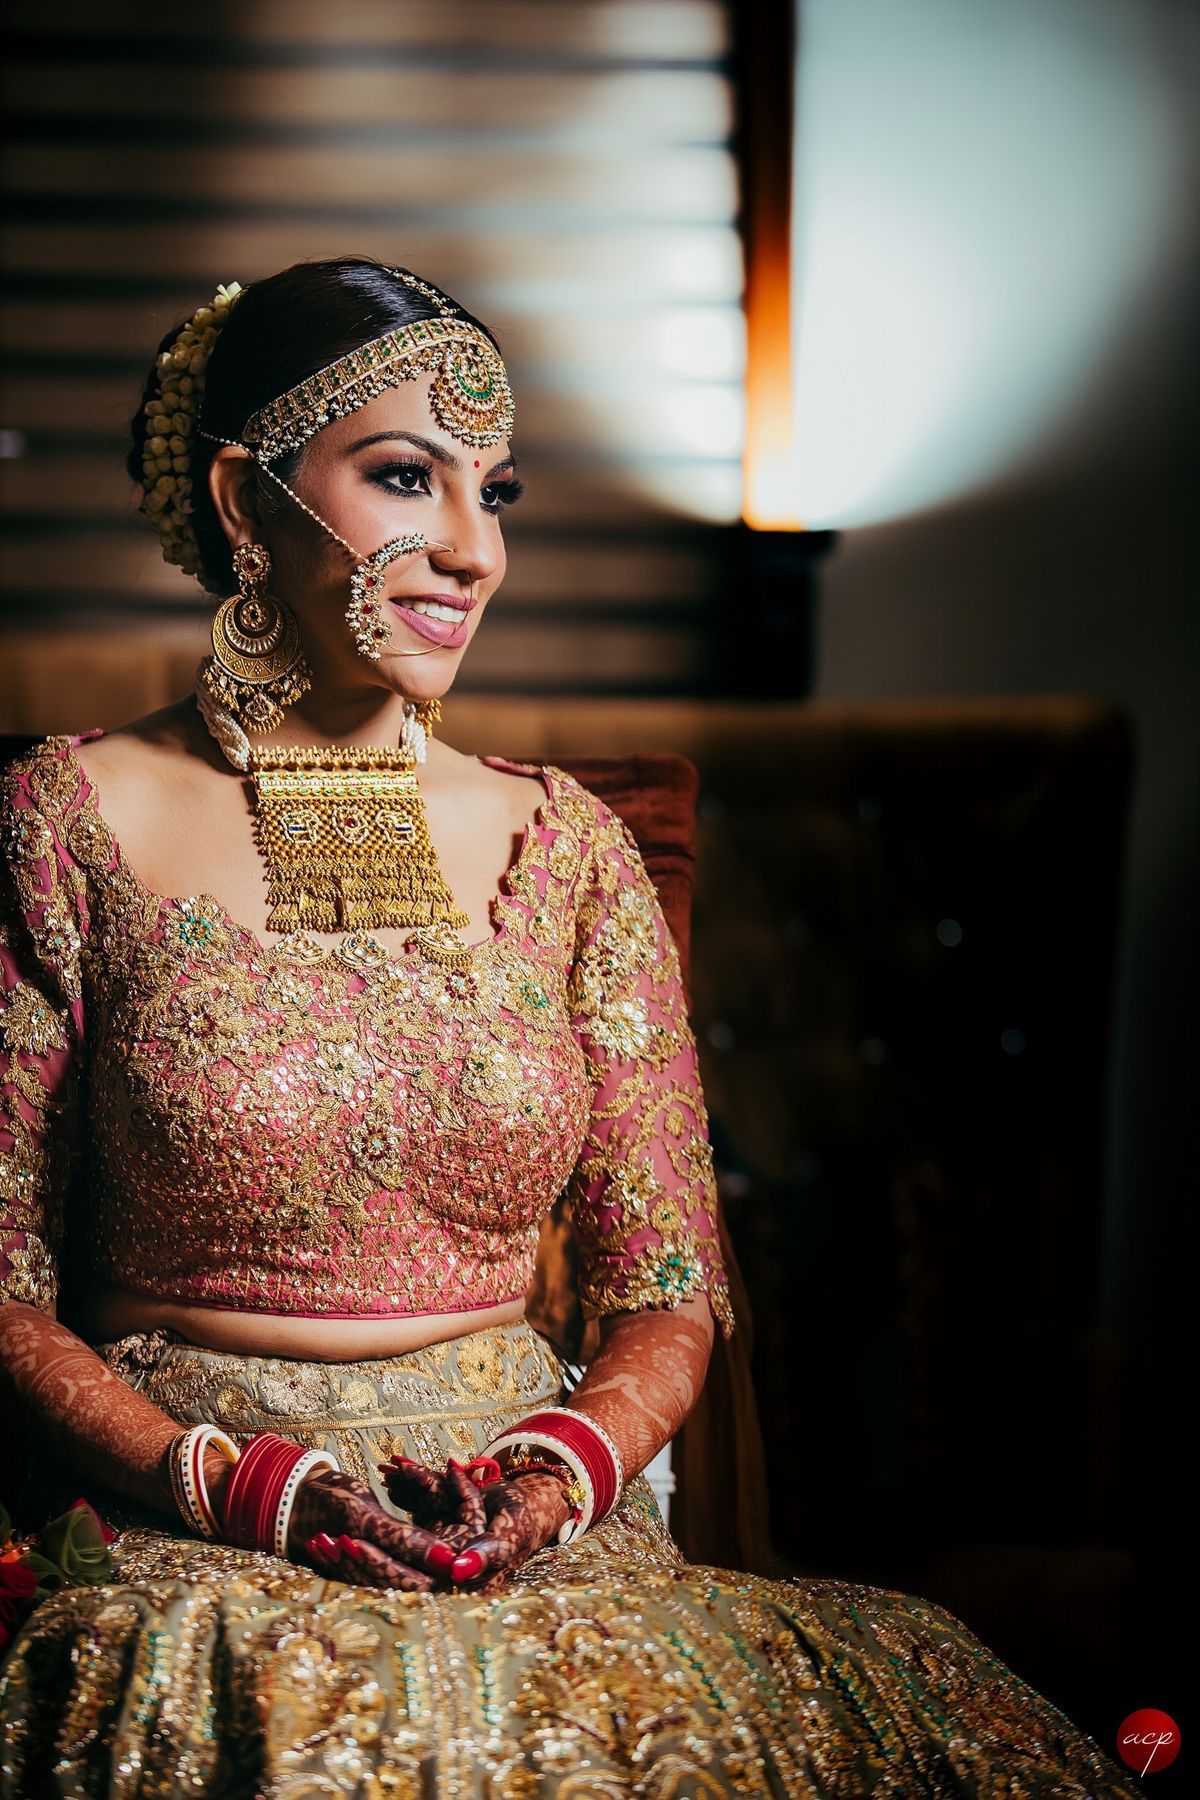 A Royal Chandigarh Wedding With The Bride In Glamorous Outfits ...